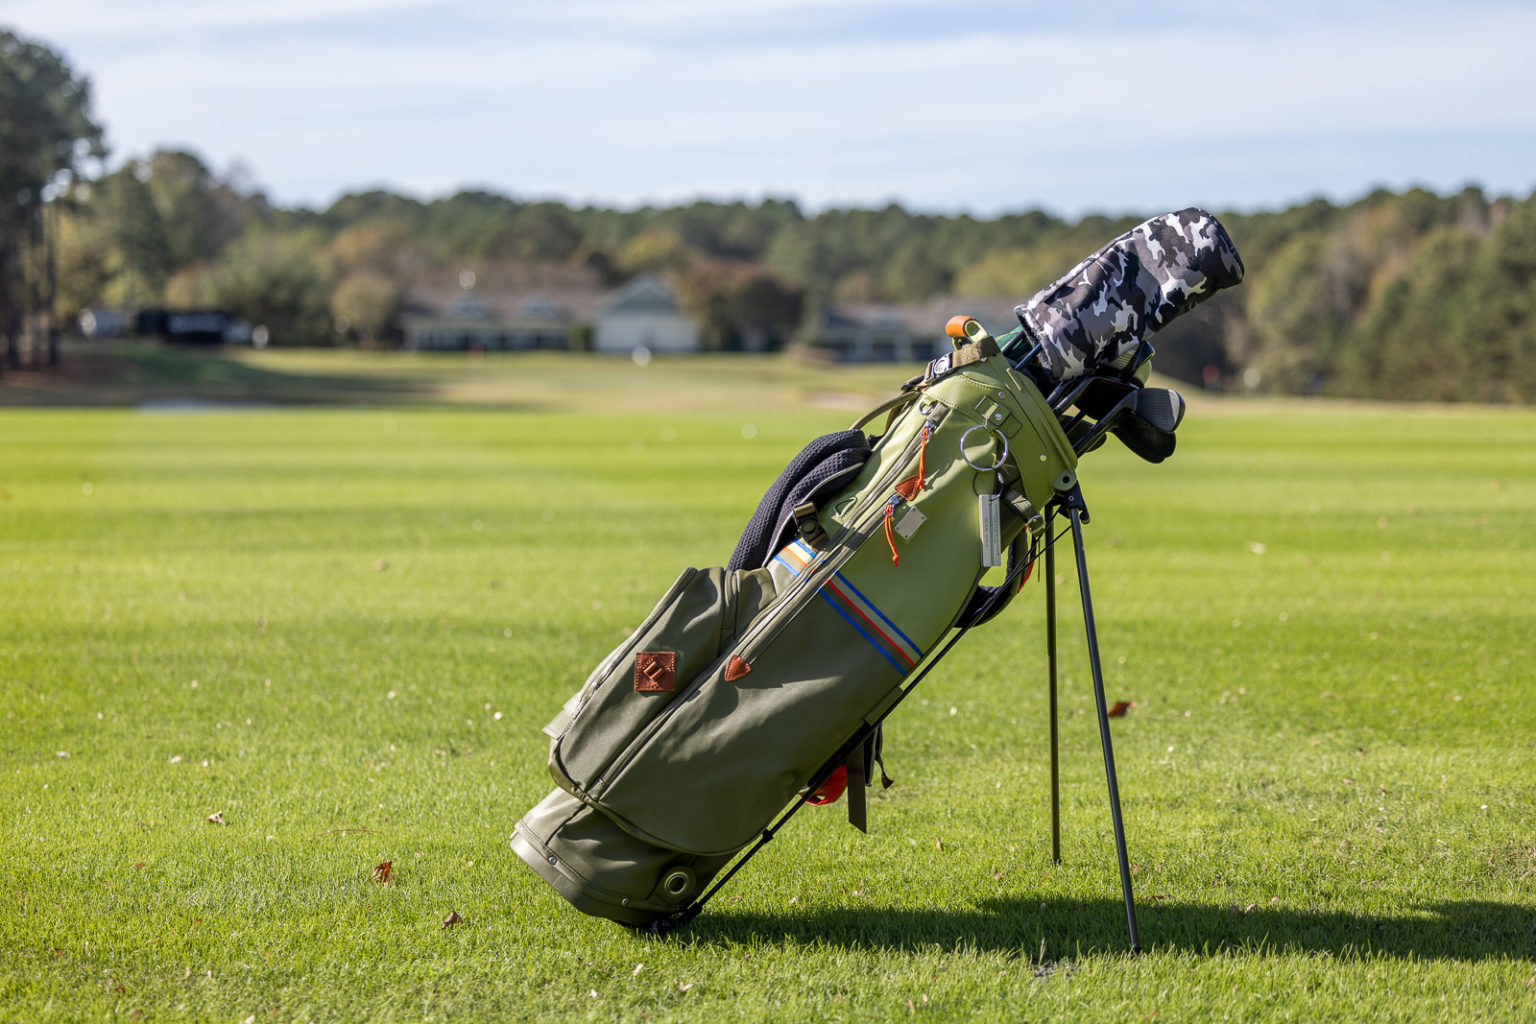 Sun Mountain Mid Stripe Golf Bag: A New Player in Luxury Bag Market